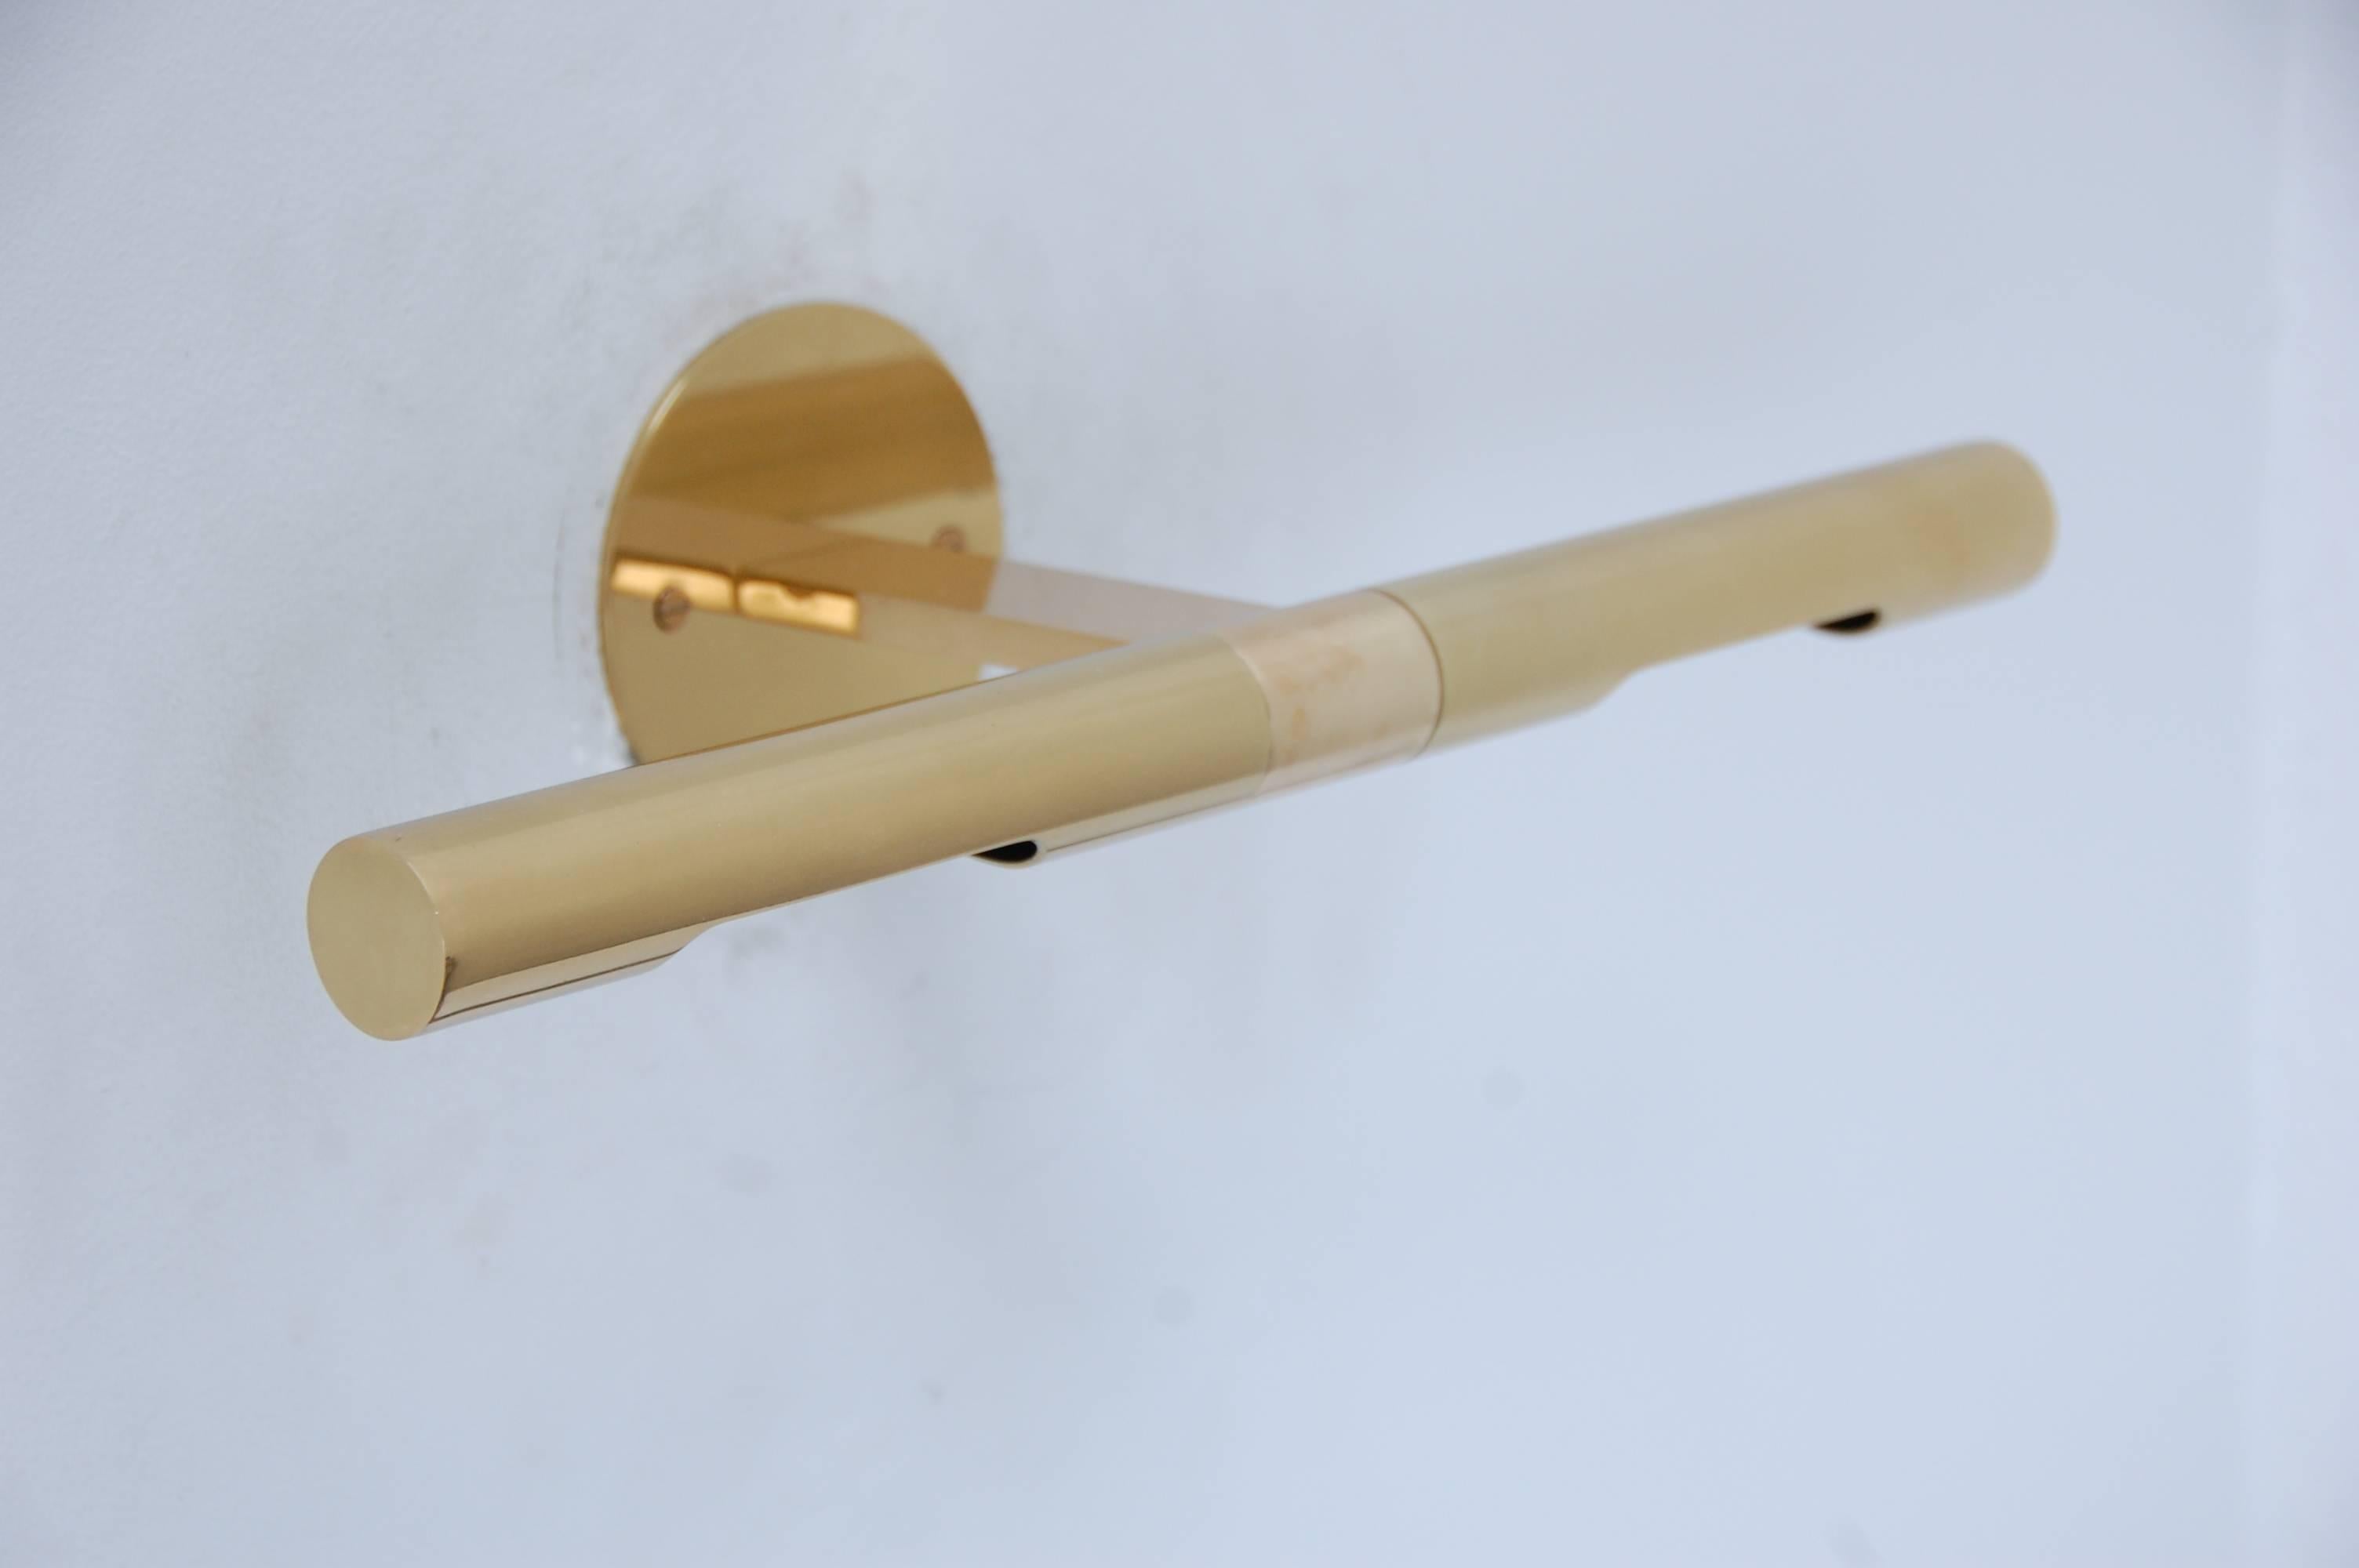 Superbly crafted linear wall sconce designed by Lumfardo Luminaires in a lightly patinated lacquered (gold) brass finish. Sconce is designed to feature artwork and/or objets d’art. Each shade is independent and can be directed individually. Fixture